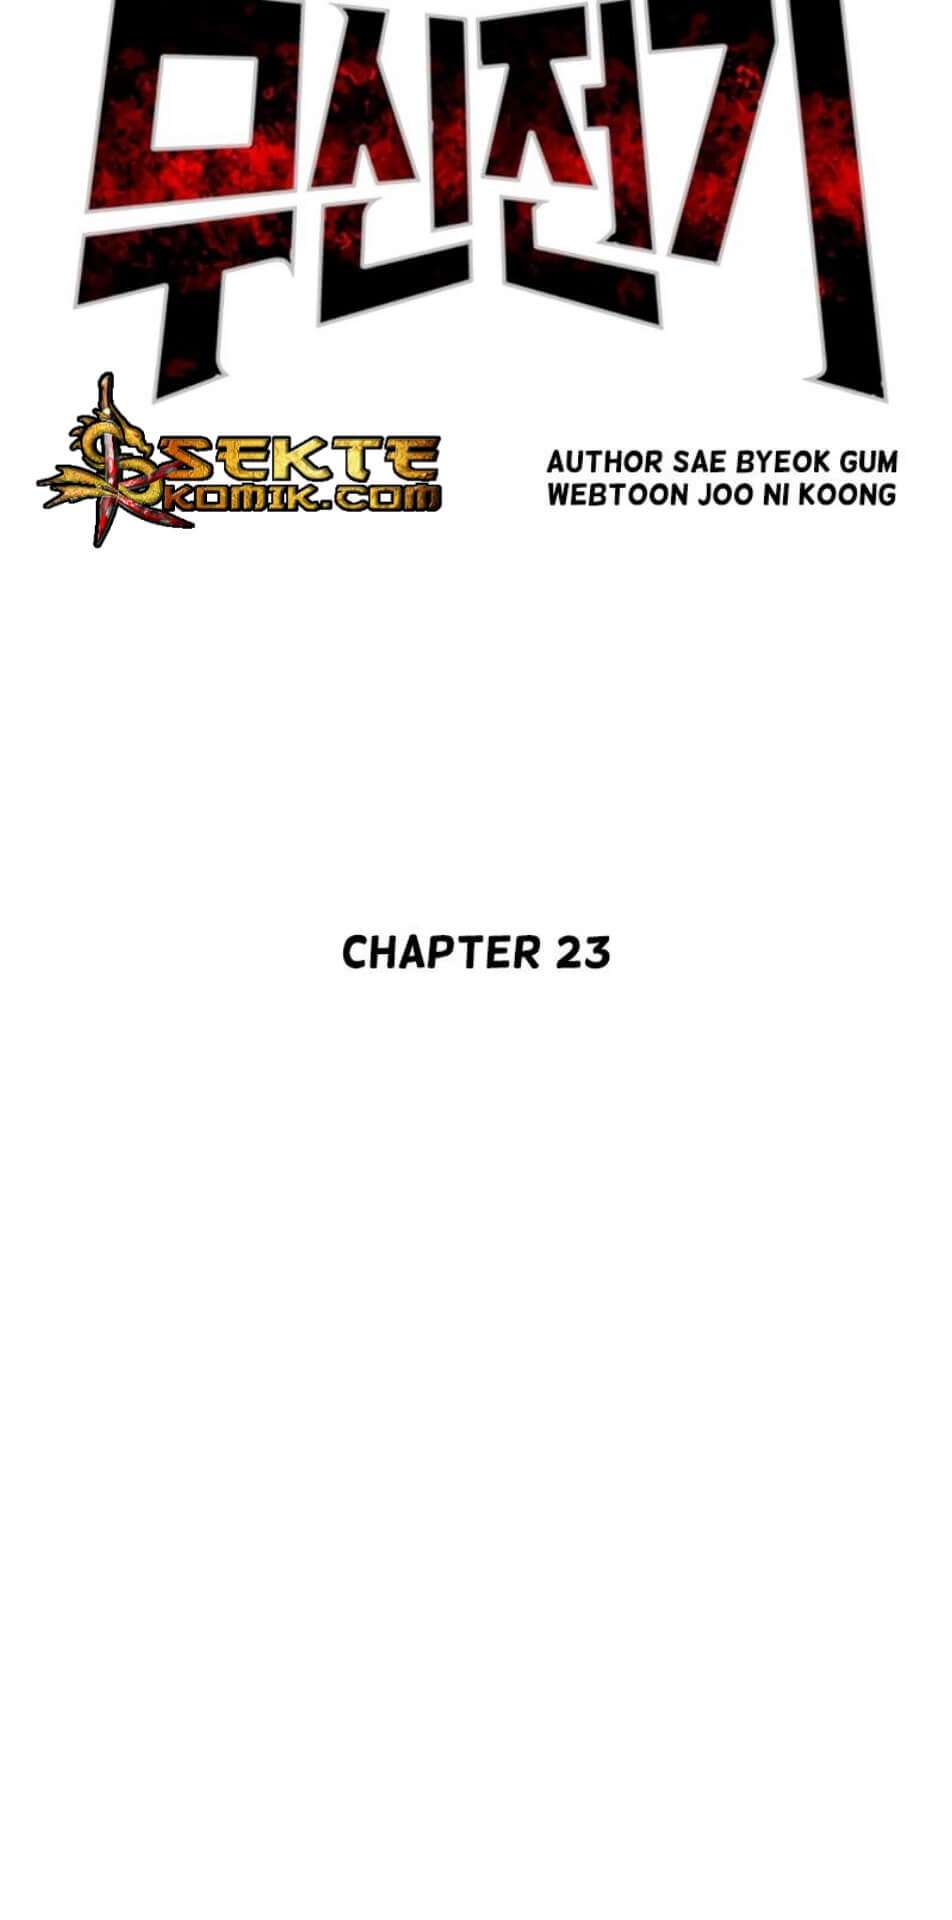 Record of the War God Chapter 23